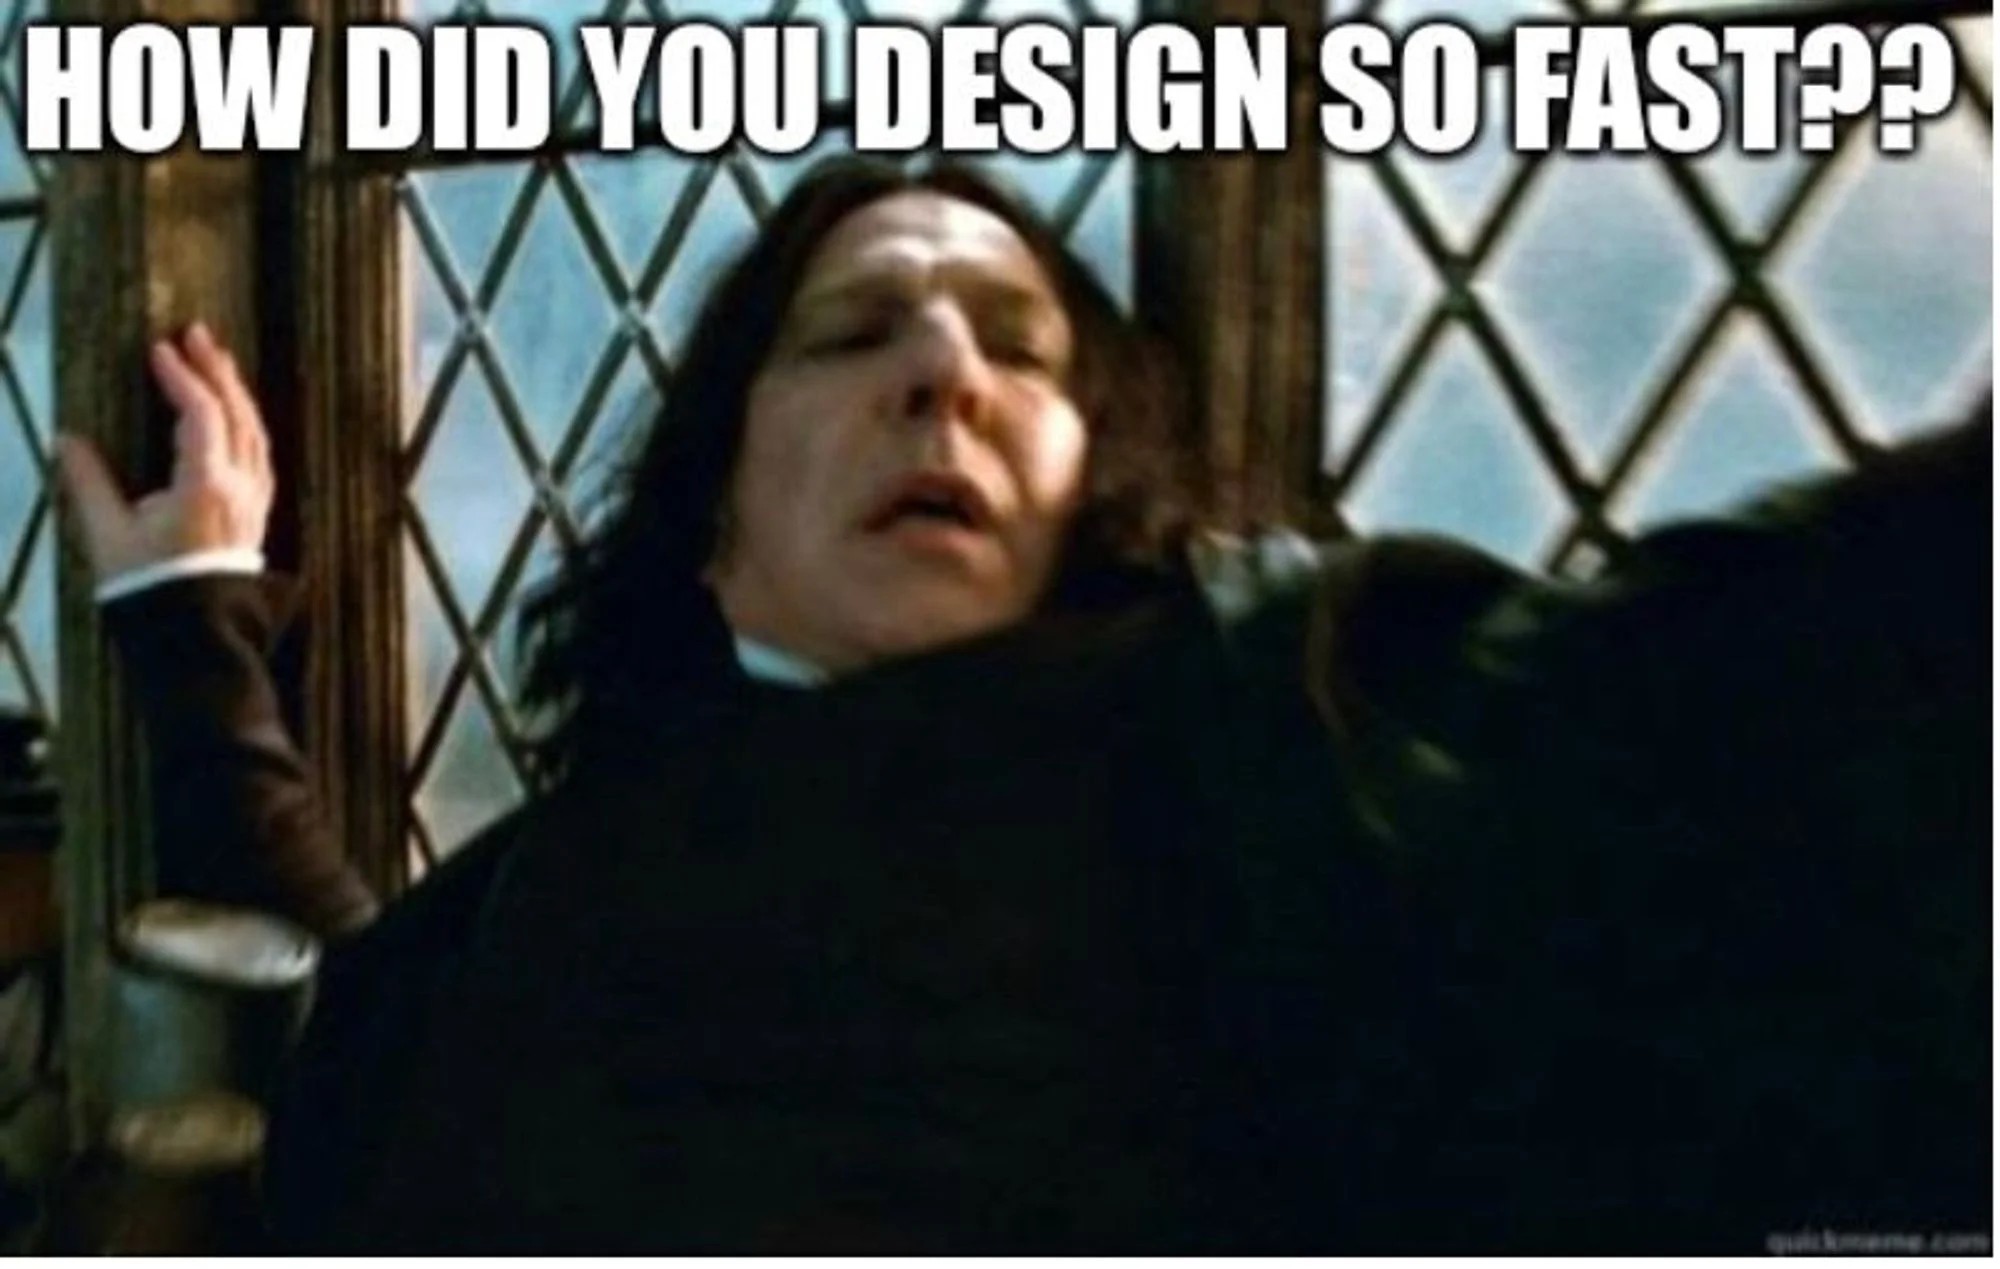 Super fast Webflow design times. Snape Knows.